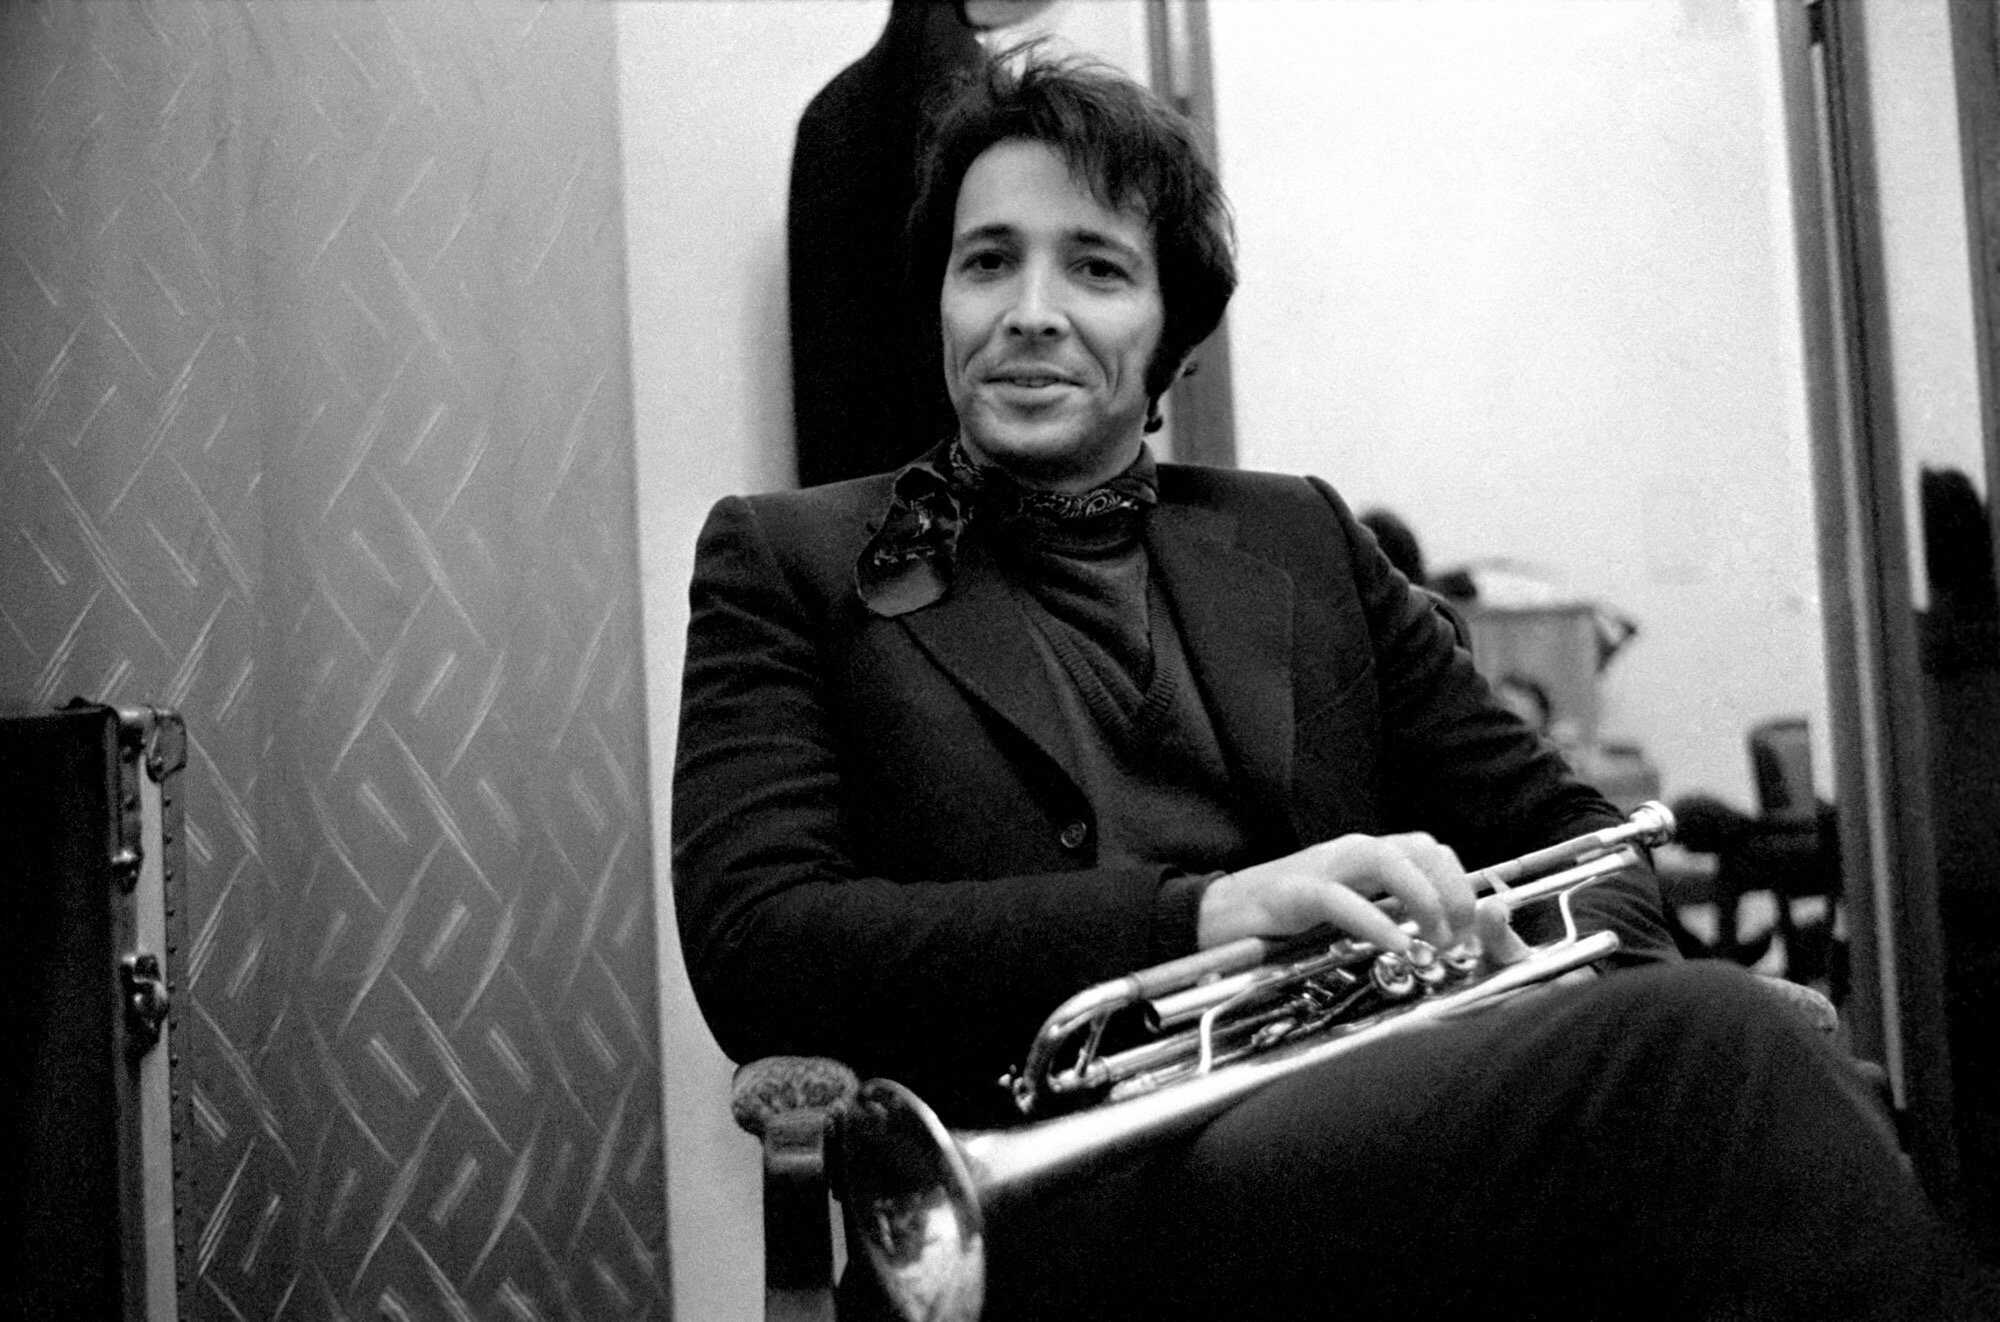 Herb Alpert wearing a suit while holding a trumphet